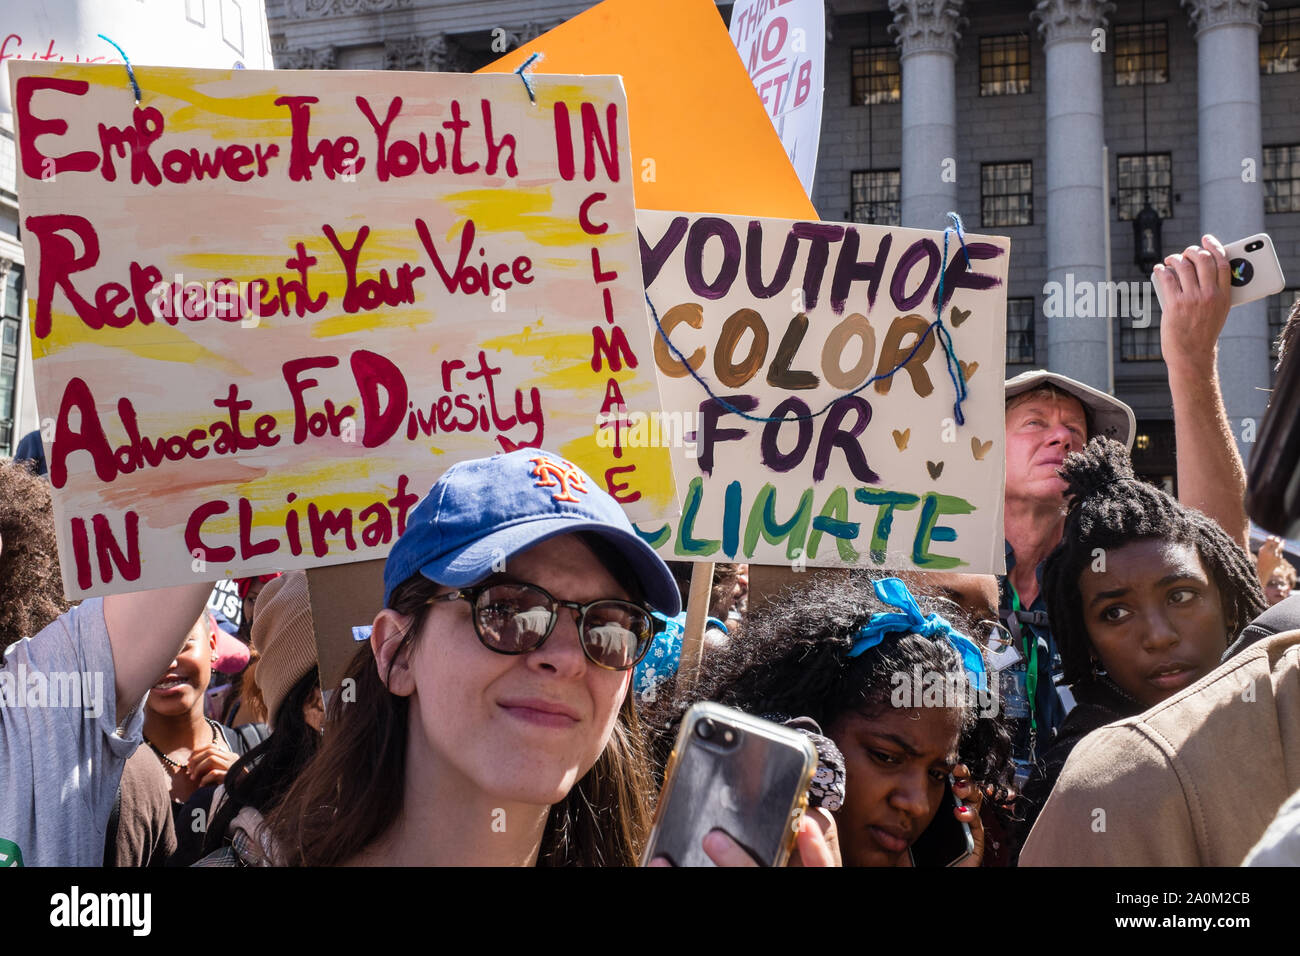 New York, USA. 20th Sep 2019.  Thousands of students as well as adults gathered in New York for the Global Climate Strike, meeting in Foley Square near the Federal Government buildings and New York's City Hall, and marching downtown to Battery Park, where Swedish climate activist and spokesperson Greta Thunberg addressed the crowd. Two signs read 'Empower the youth / represent your voice / advocate for diversity / in climate,' and 'Youth of color for climate.' Credit: Ed Lefkowicz/Alamy Live News Stock Photo